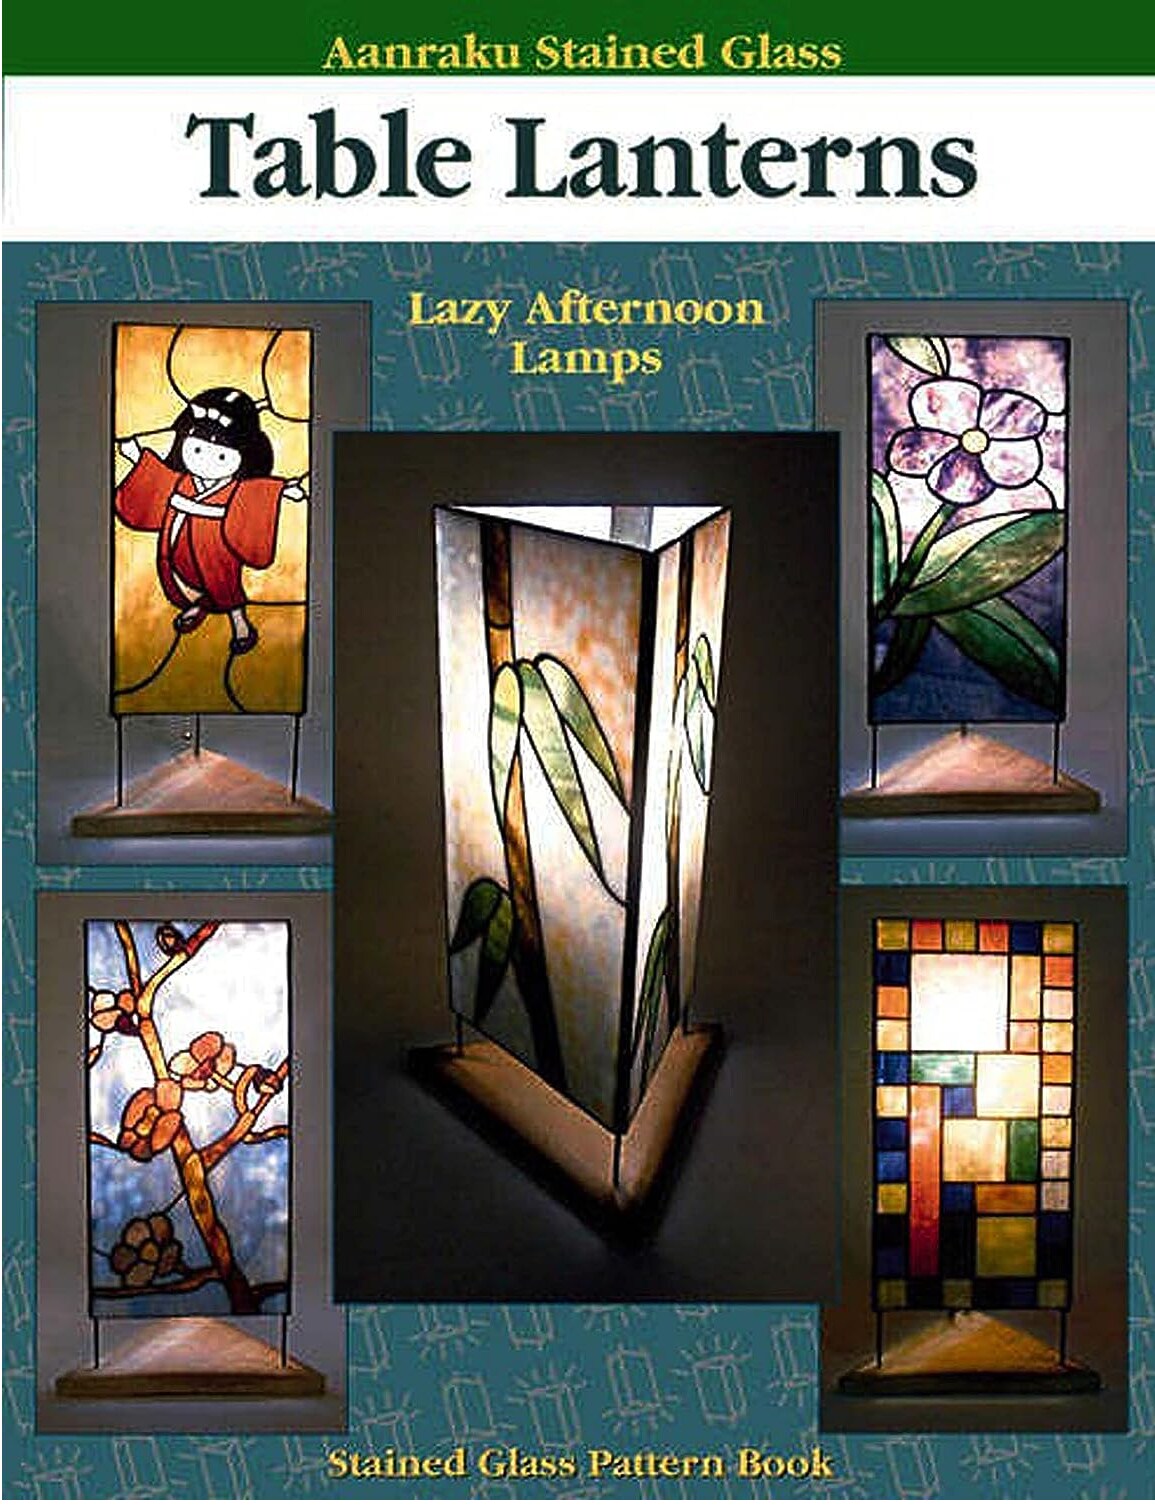 Stained Glass Pattern Book: Table Lanterns I